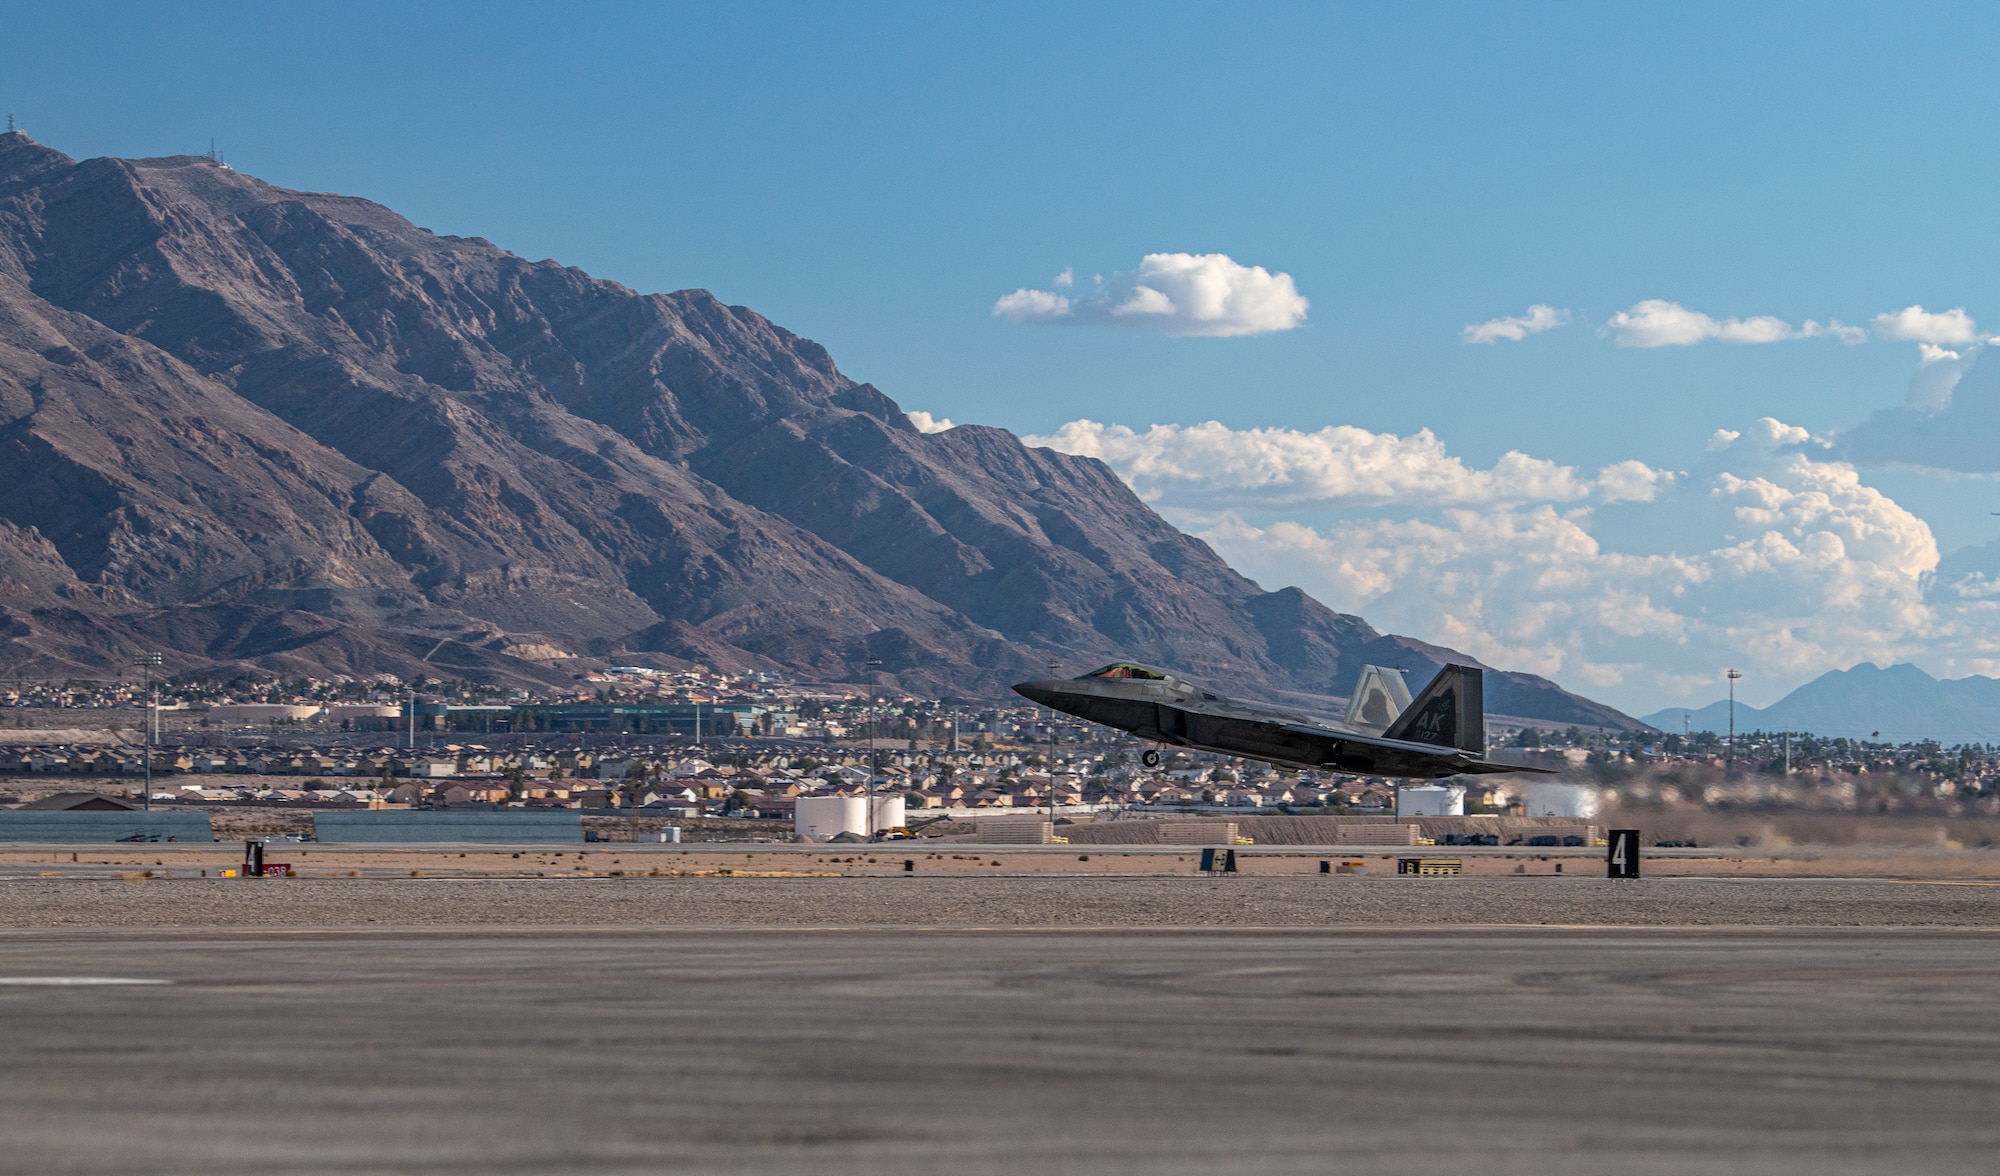 An F-22 Raptor assigned to the 525th Expeditionary Fighter Squadron, Joint Base Elmendorf-Richardson, Alaska, takes off in support of Exercise Bamboo Eagle 24-1 at Nellis Air Force Base, Nevada, Jan. 25, 2024.